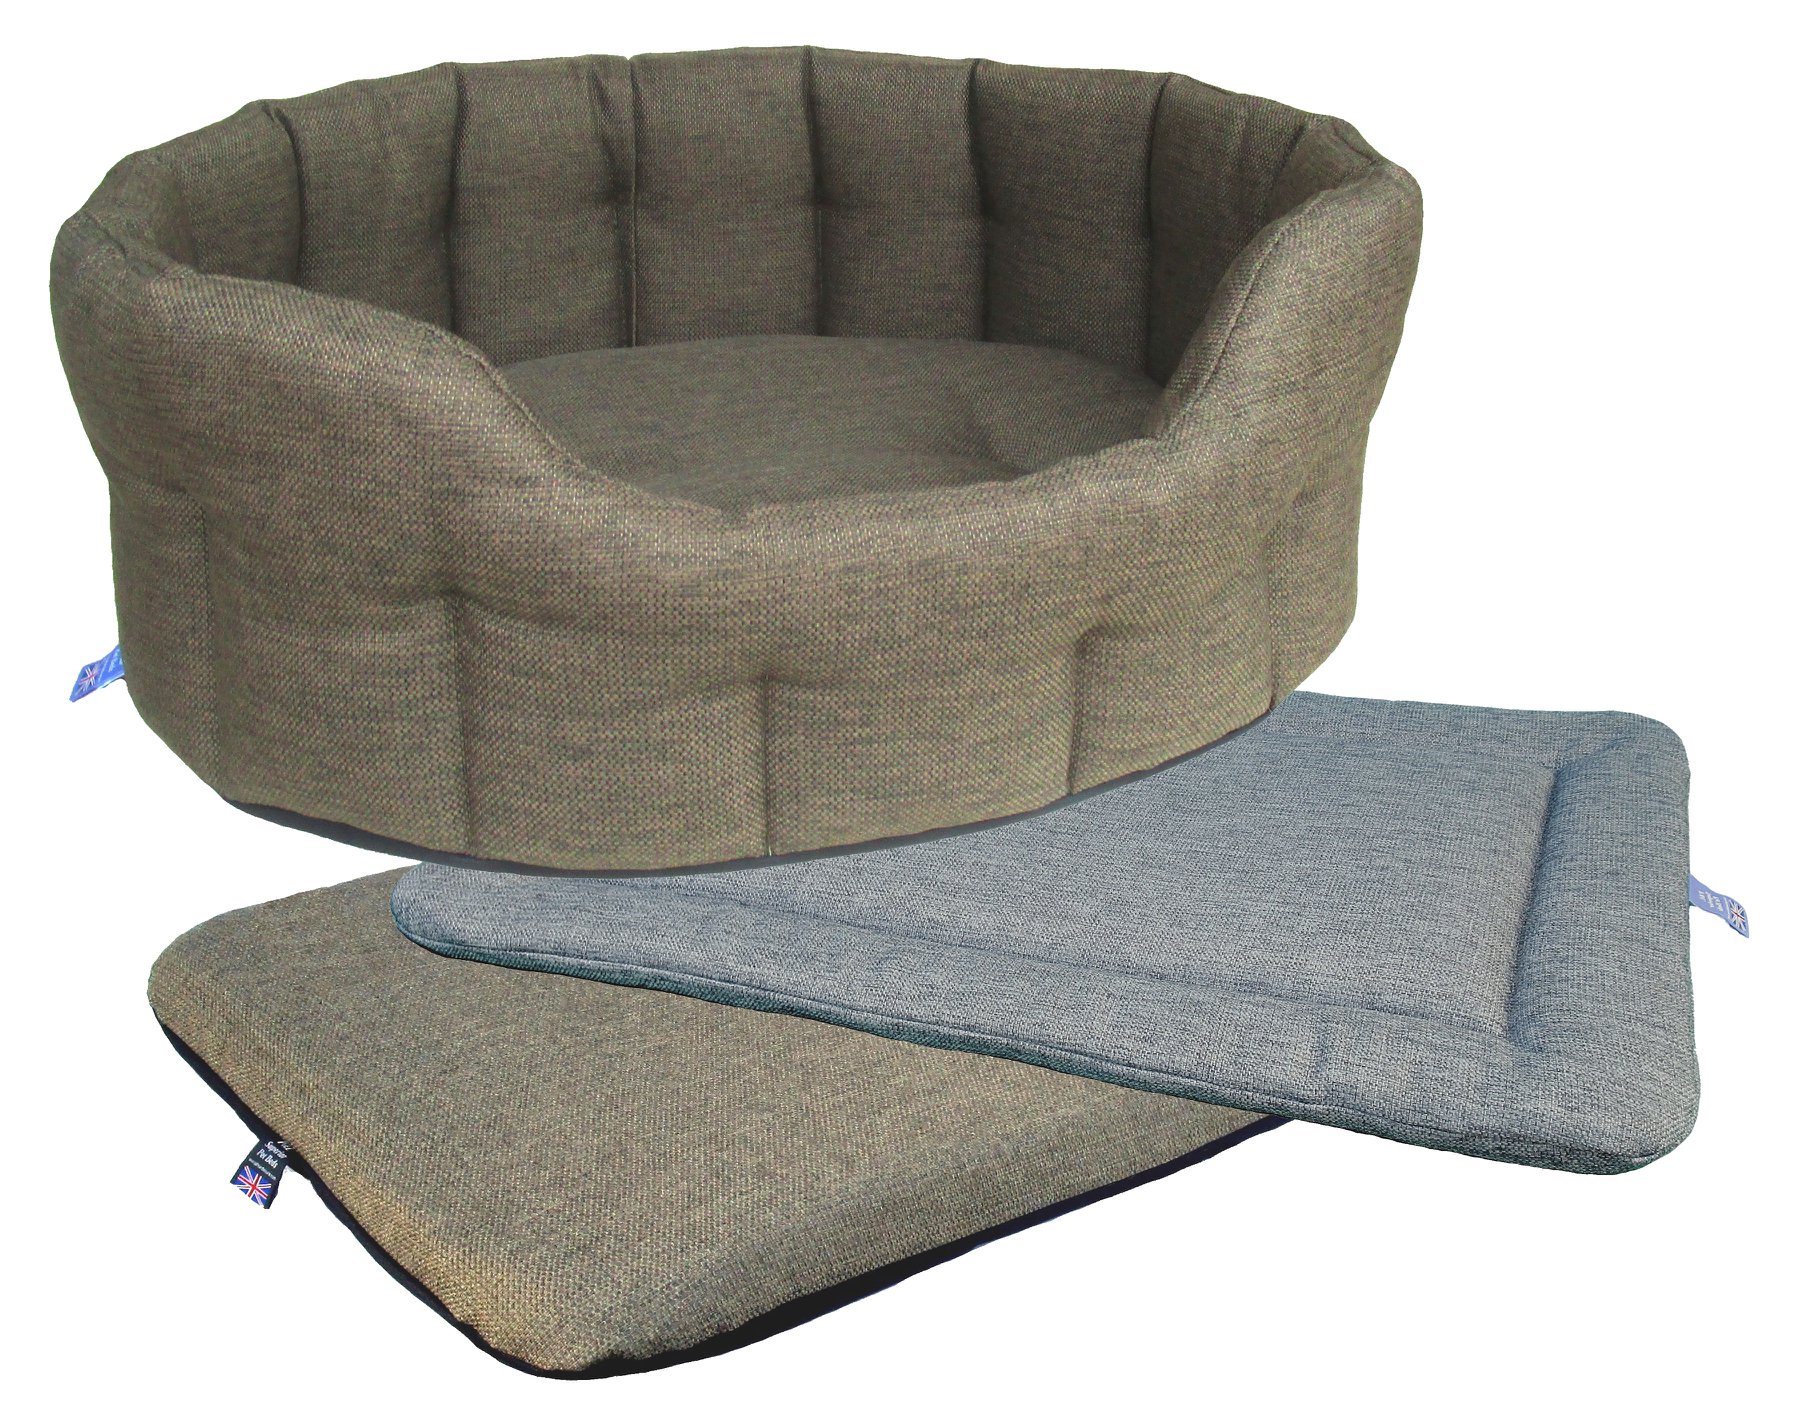 PandLBasket weave Dog bed collection